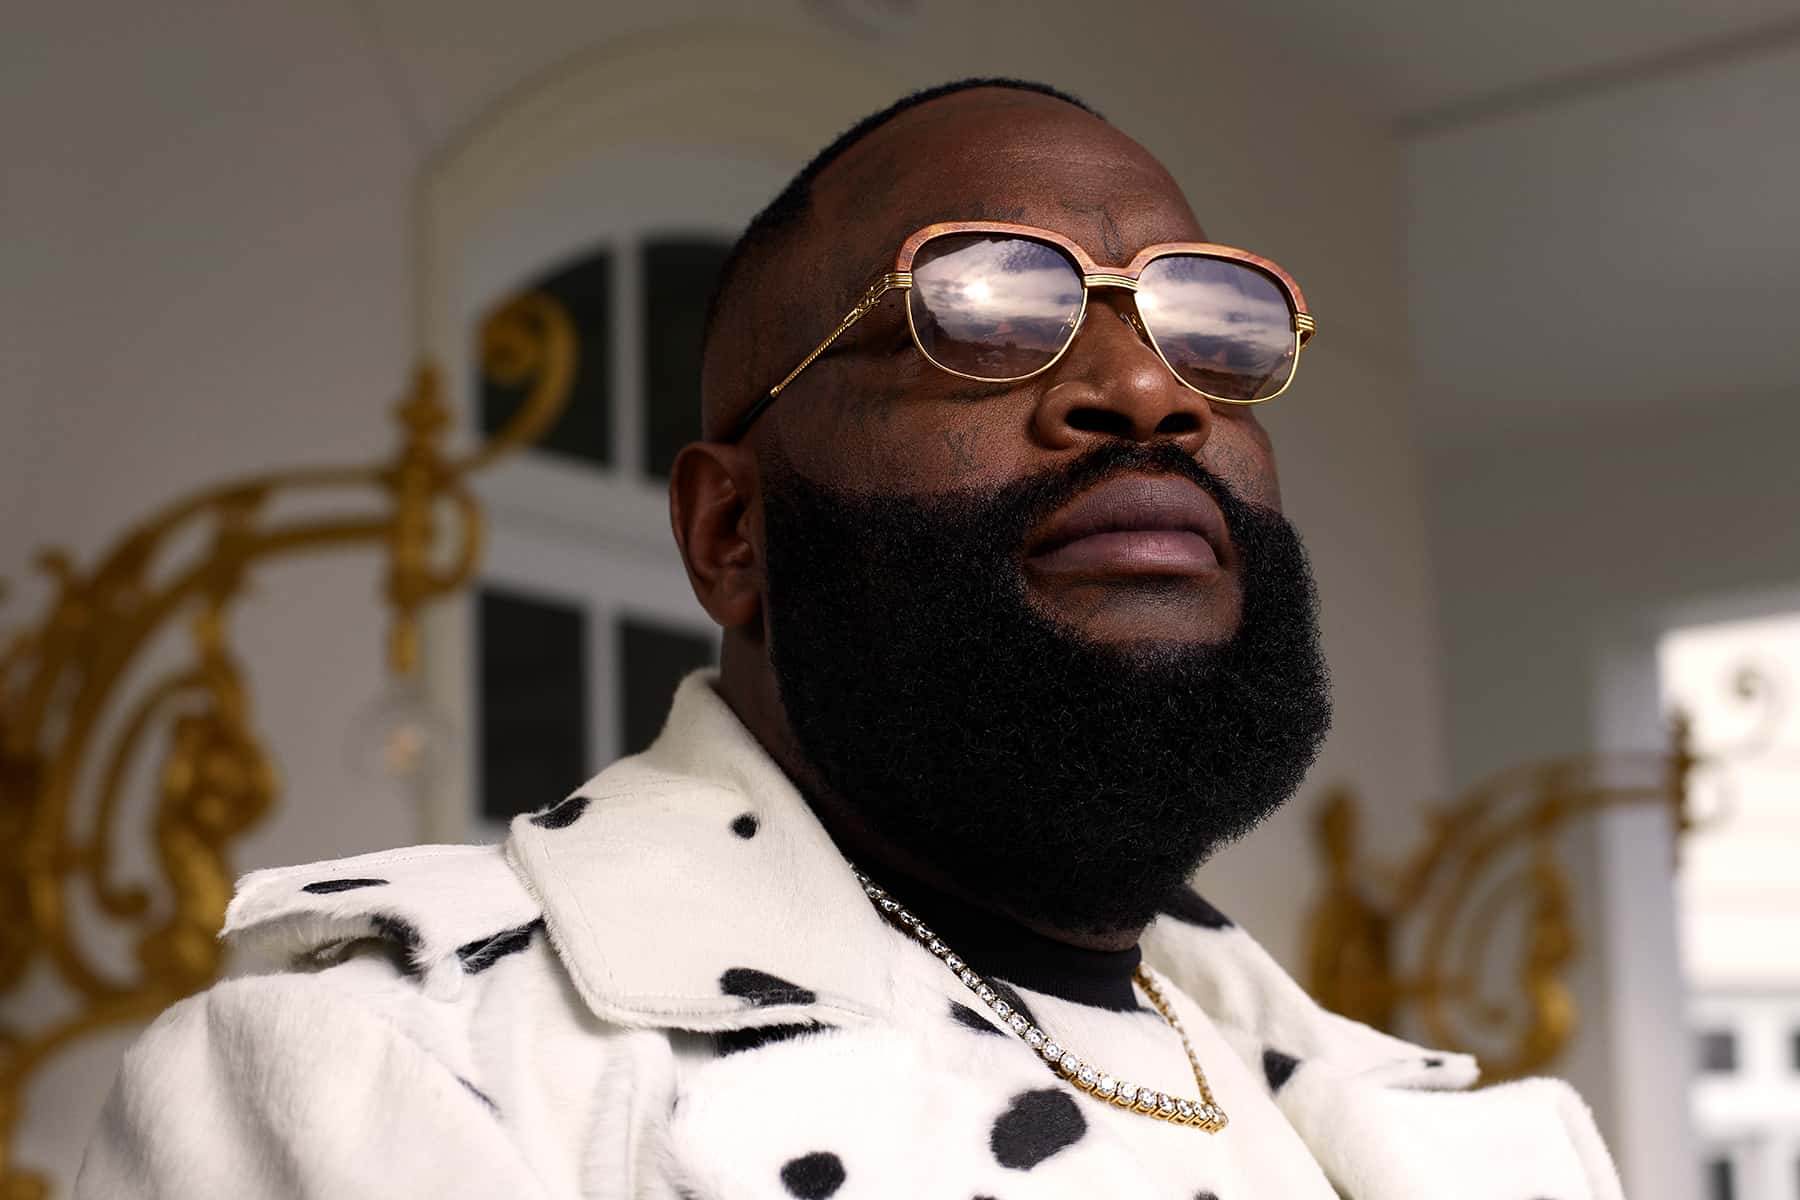 Image of Rick Ross